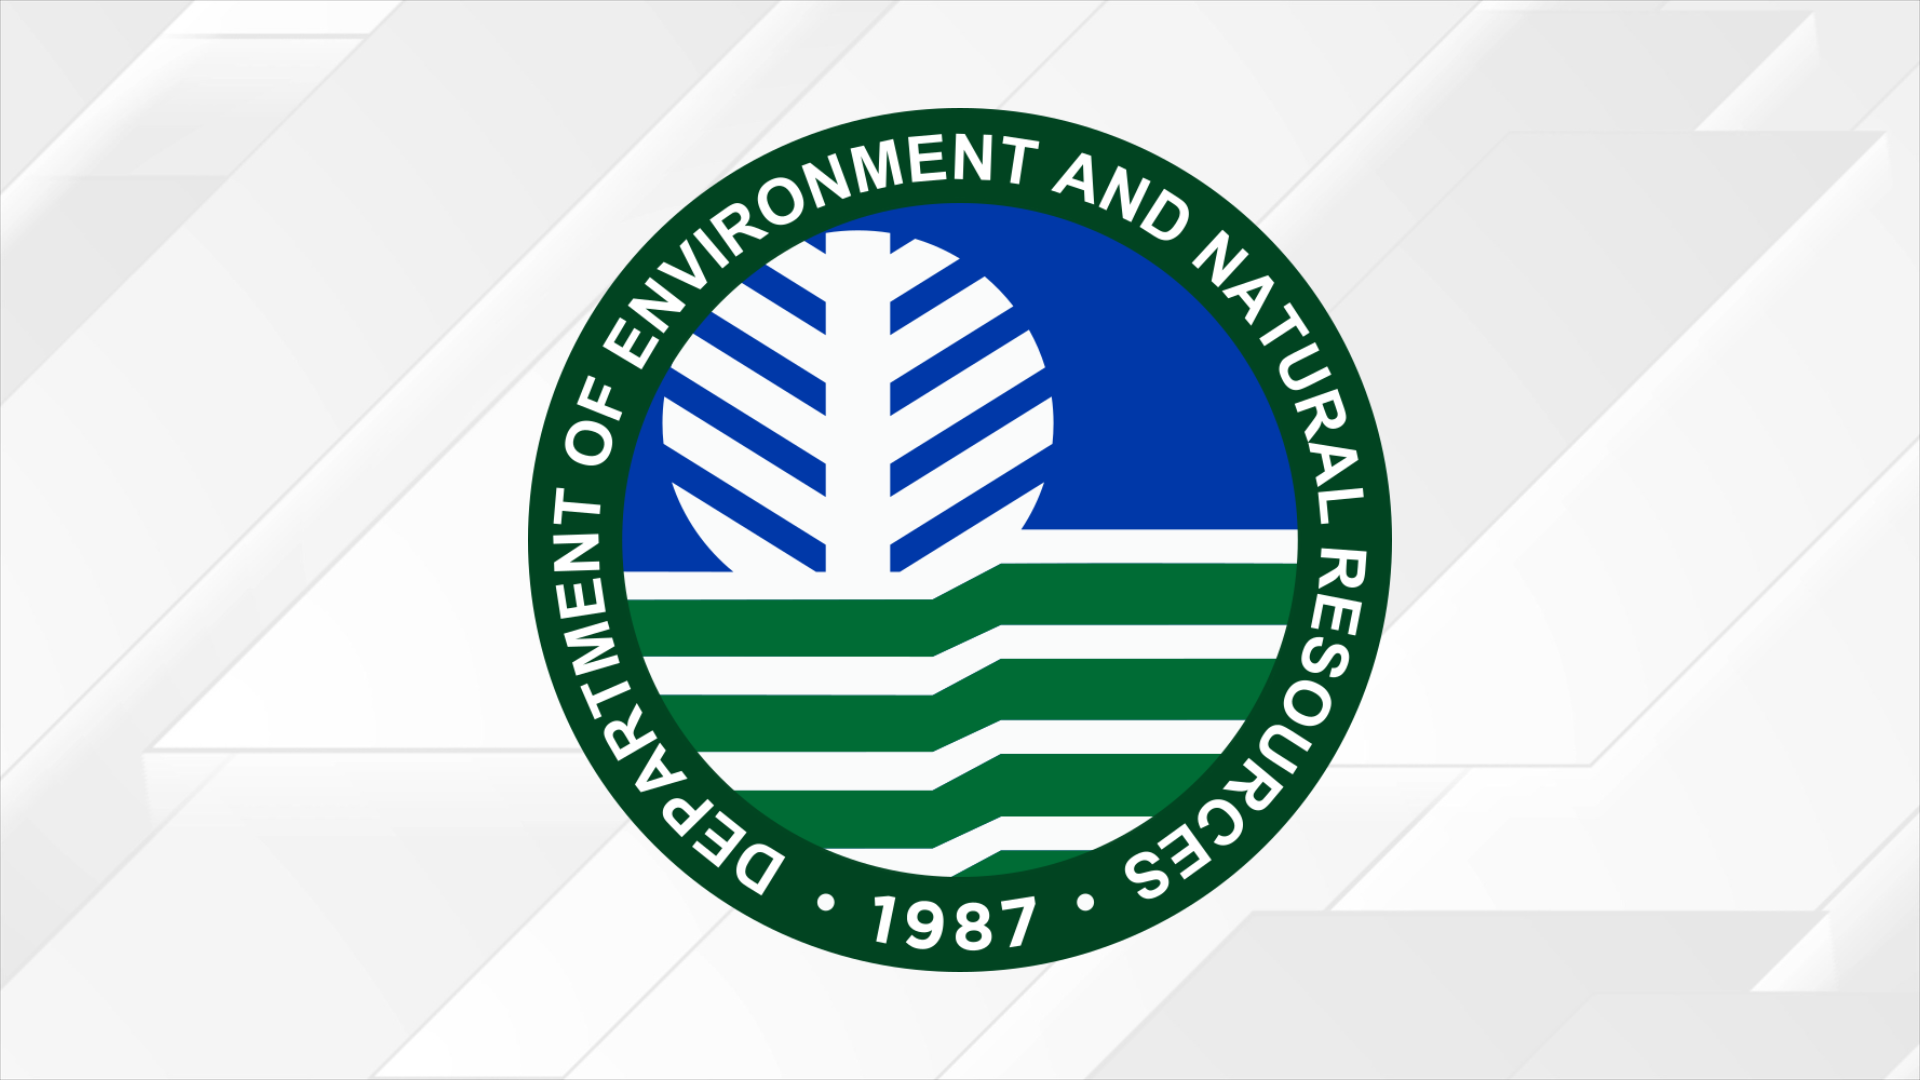 The government is eyeing the use of modular desalination process to provide formal water systems in isolated islands, according to an official from the Department of Environment and Natural Resources (DENR) on Tuesday.